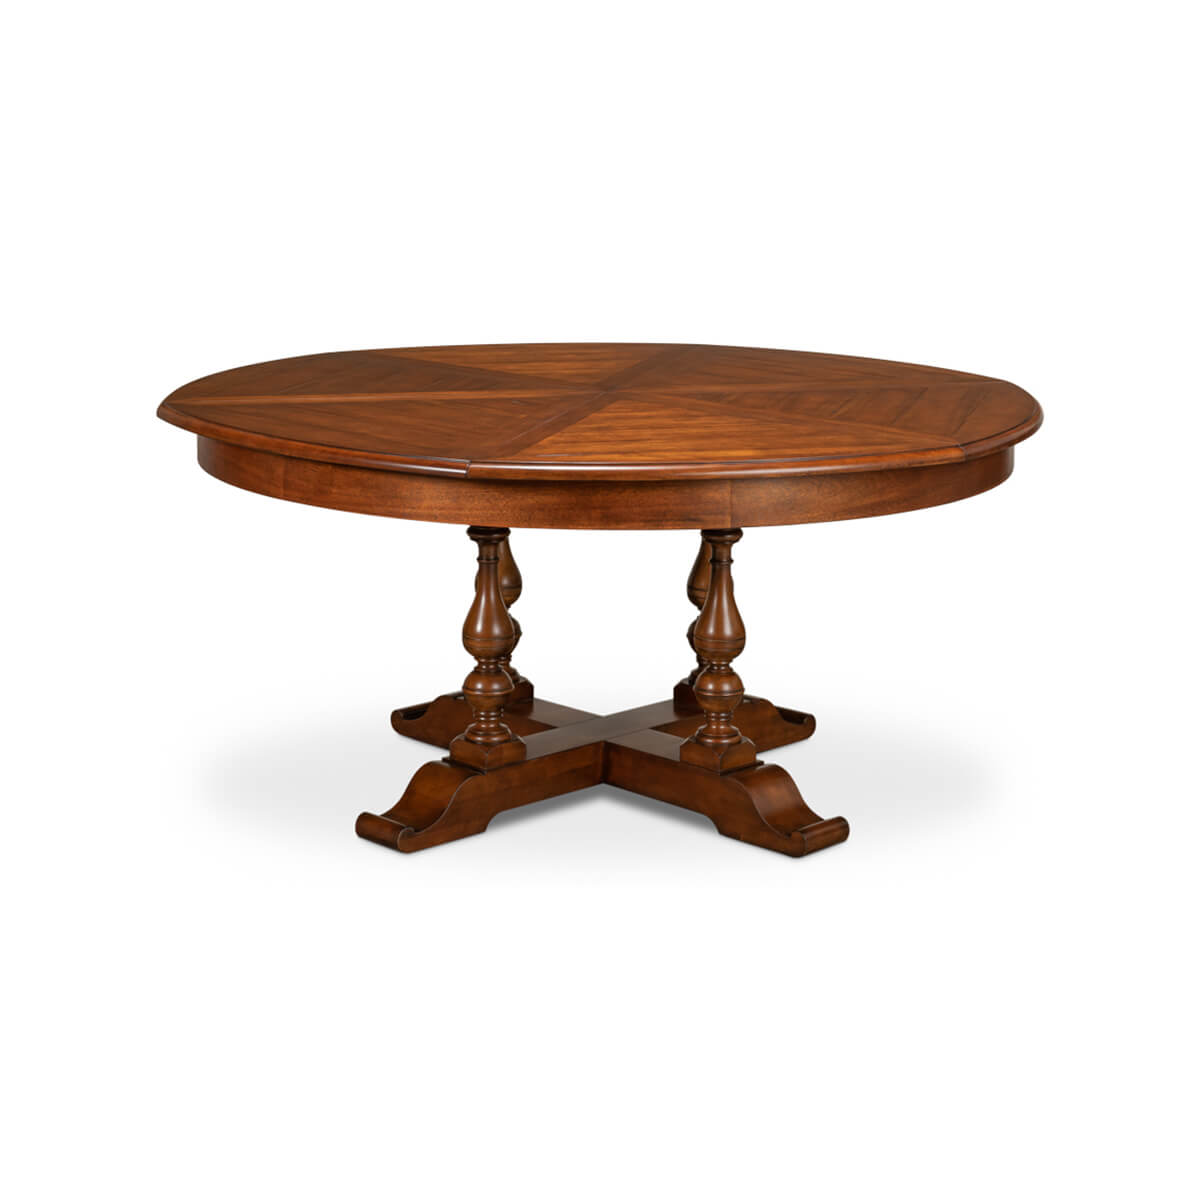 Early English Style Round Extension Dining Table, 84" - English Georgian America